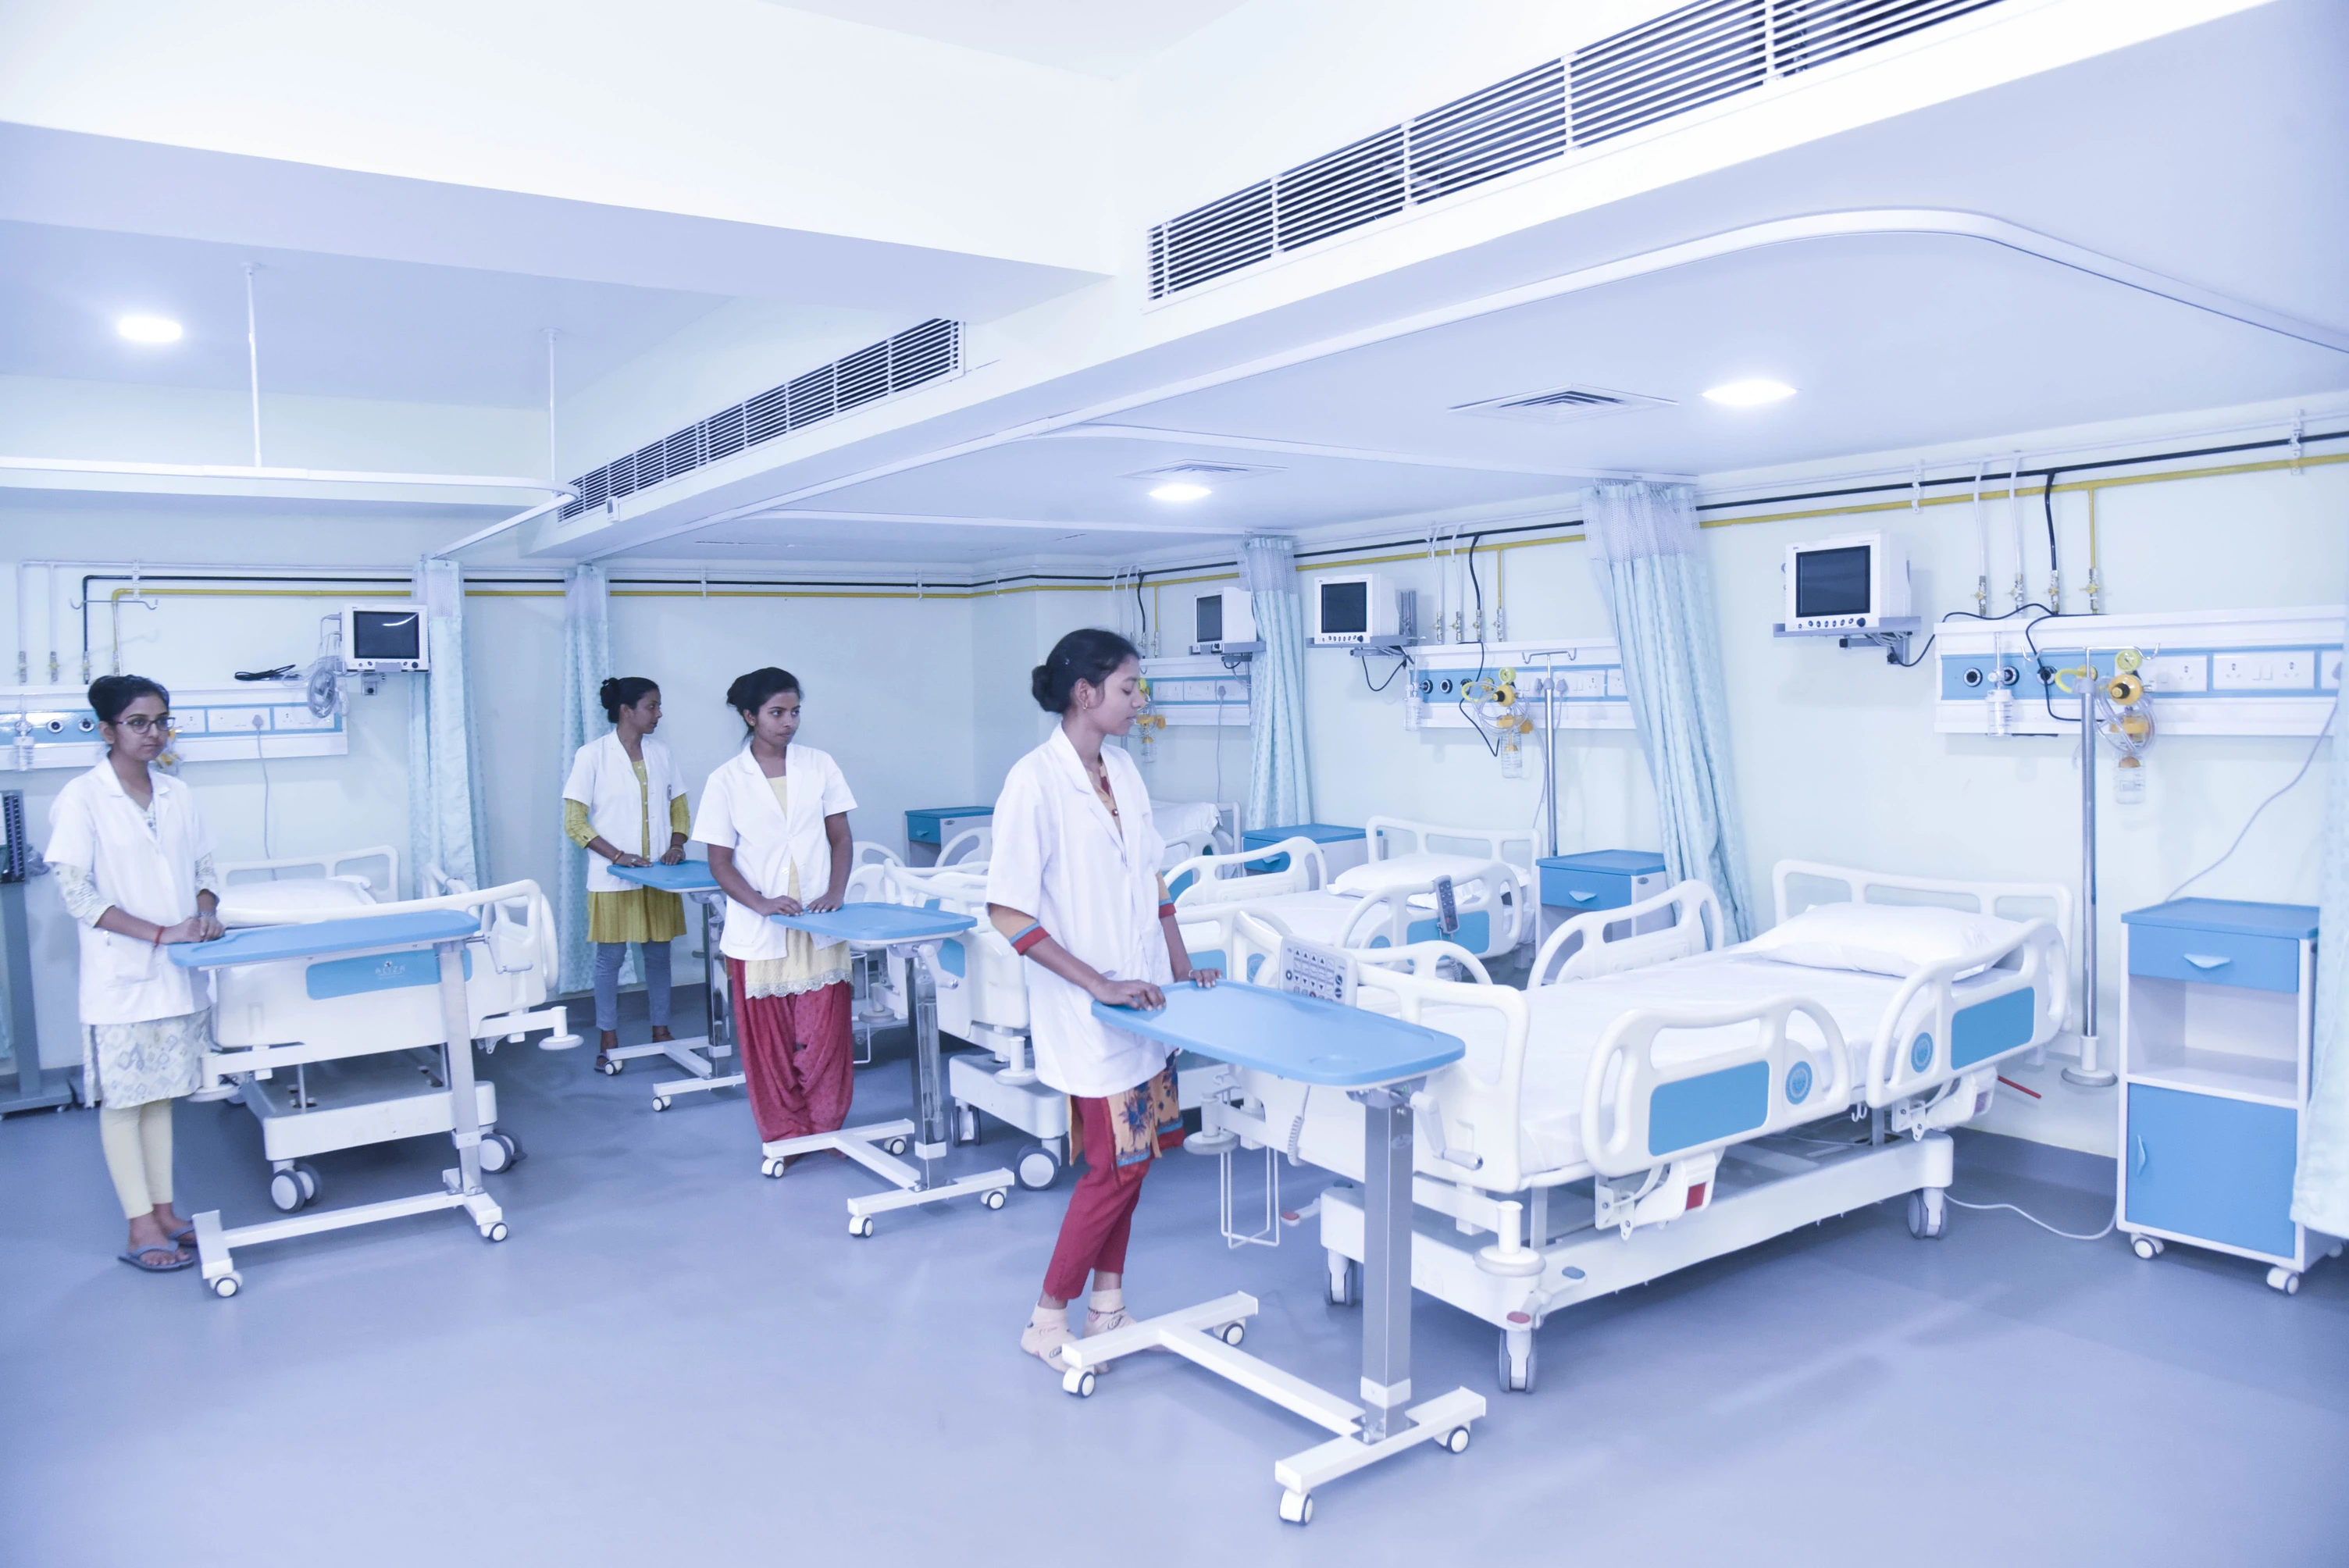 Internal view of Mims Hospital in Patna